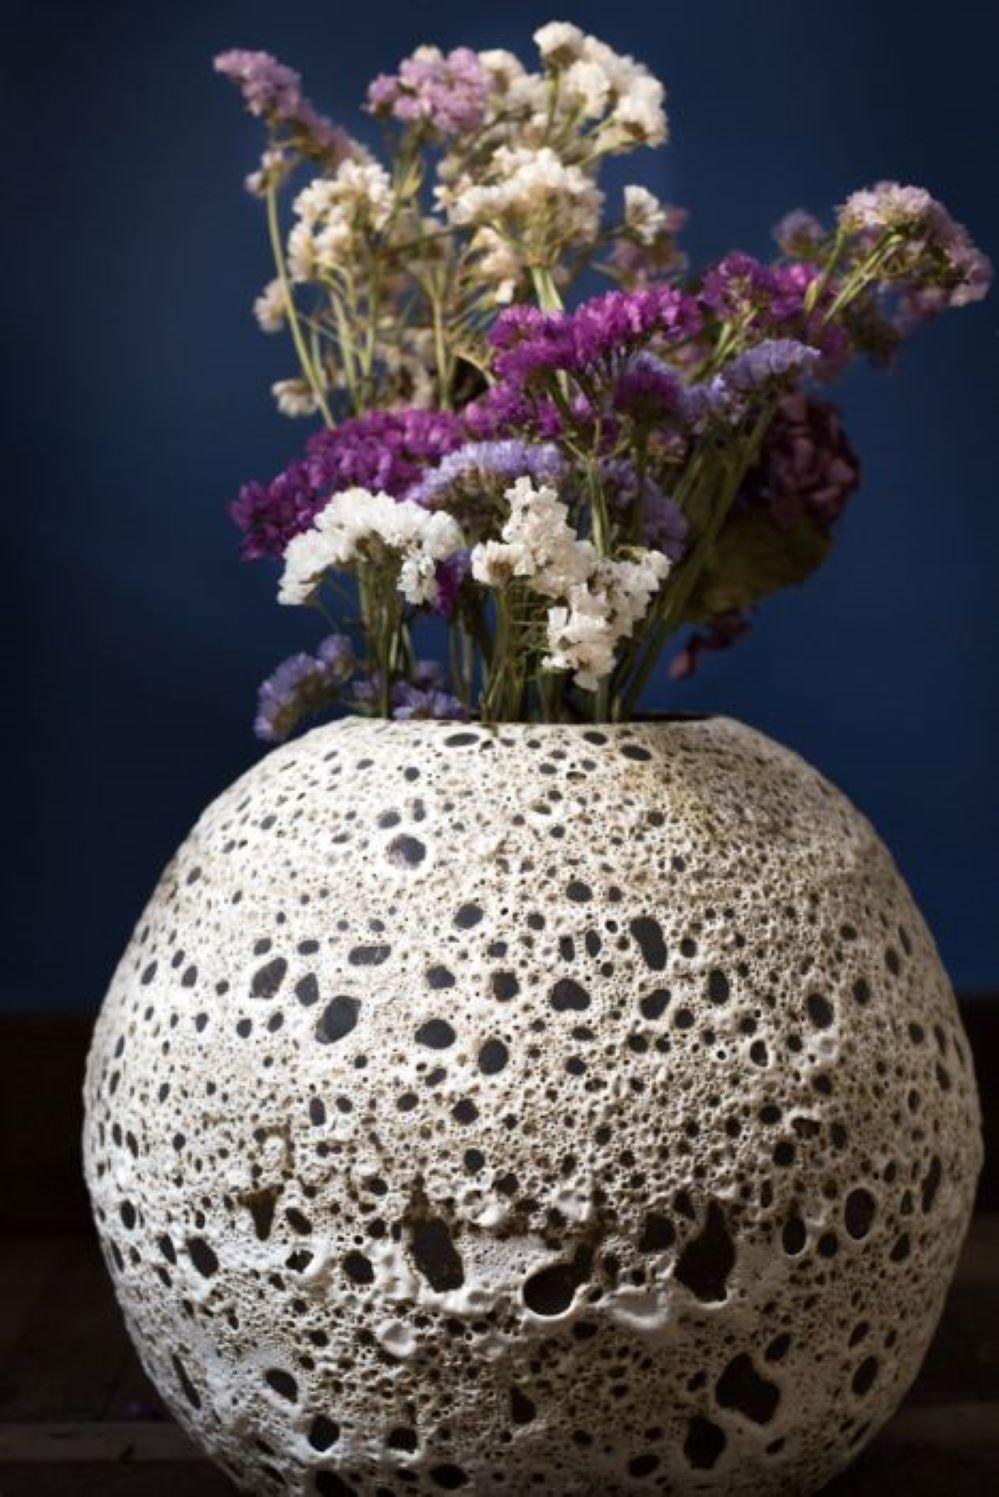 Vase inspired by depths of the sea, through its precious corals and fossil limestone. A witness to the passing of time

Ceramic
D 30 x 30 cm

Design and produced in Italy